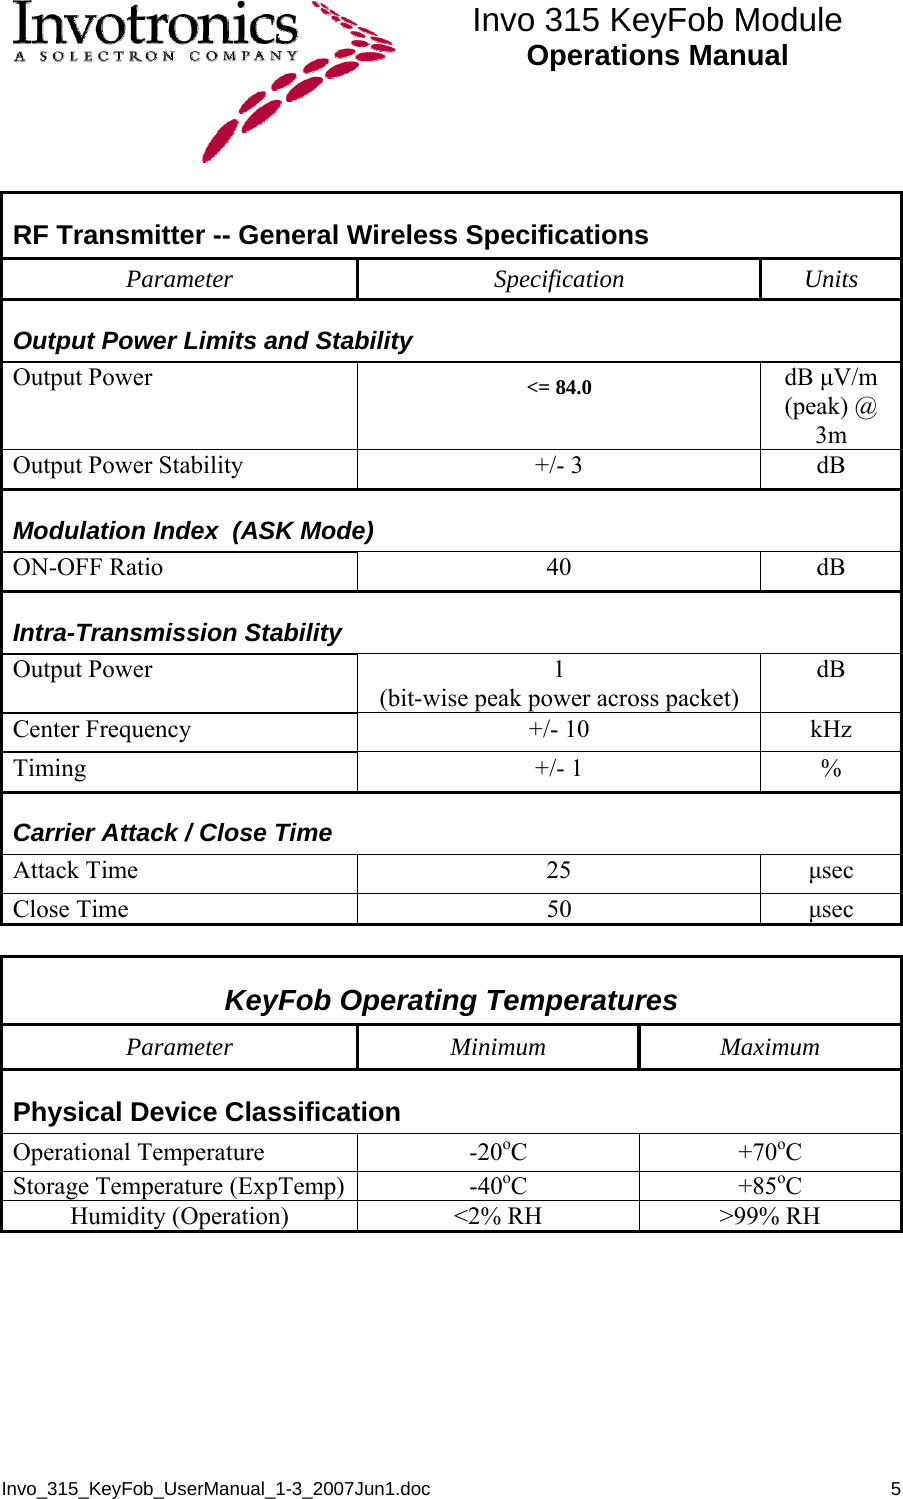  Invo 315 KeyFob Module Operations Manual  Invo_315_KeyFob_UserManual_1-3_2007Jun1.doc       5RF Transmitter -- General Wireless Specifications Parameter Specification Units Output Power Limits and Stability Output Power  &lt;= 84.0  dB μV/m (peak) @ 3m Output Power Stability  +/- 3  dB Modulation Index  (ASK Mode) ON-OFF Ratio  40  dB Intra-Transmission Stability Output Power  1 (bit-wise peak power across packet) dB Center Frequency  +/- 10  kHz Timing +/- 1 % Carrier Attack / Close Time  Attack Time  25  μsec Close Time  50  μsec  KeyFob Operating Temperatures Parameter Minimum Maximum Physical Device Classification Operational Temperature  -20oC +70oC Storage Temperature (ExpTemp)  -40oC +85oC Humidity (Operation)  &lt;2% RH  &gt;99% RH  